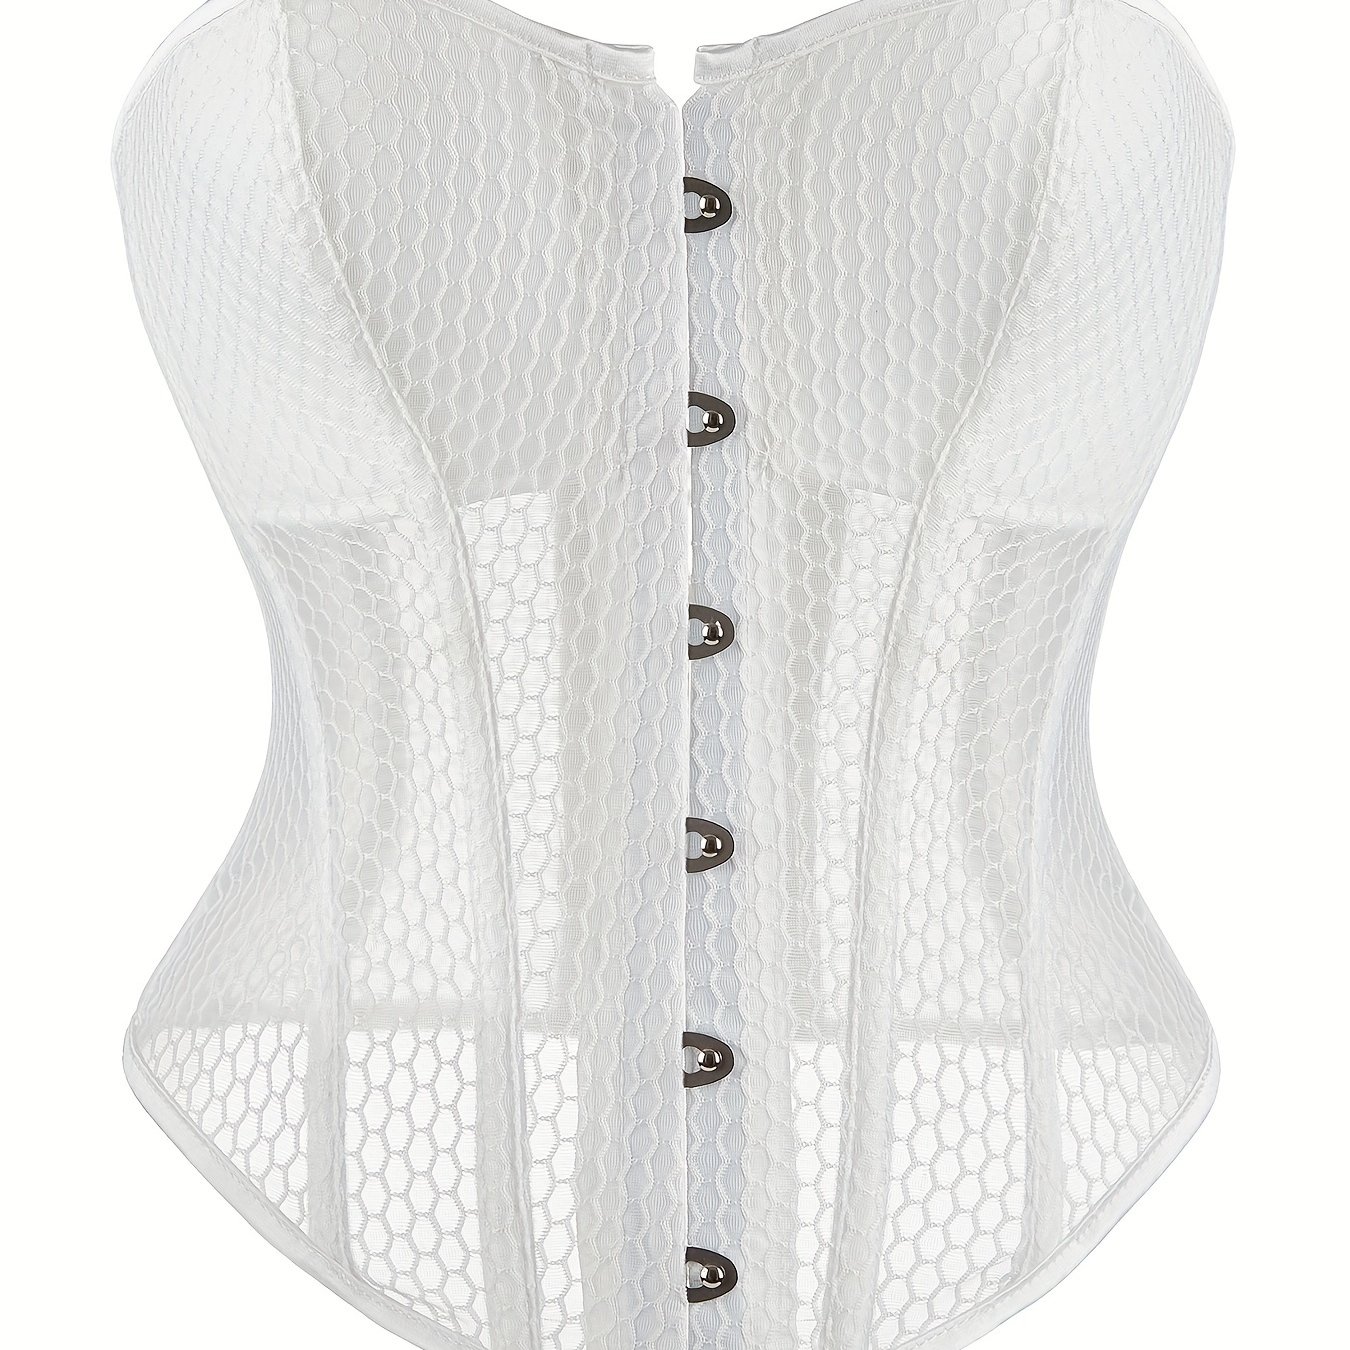 Bombshell Strappy Fishnet Lace Push-Up Corset Top